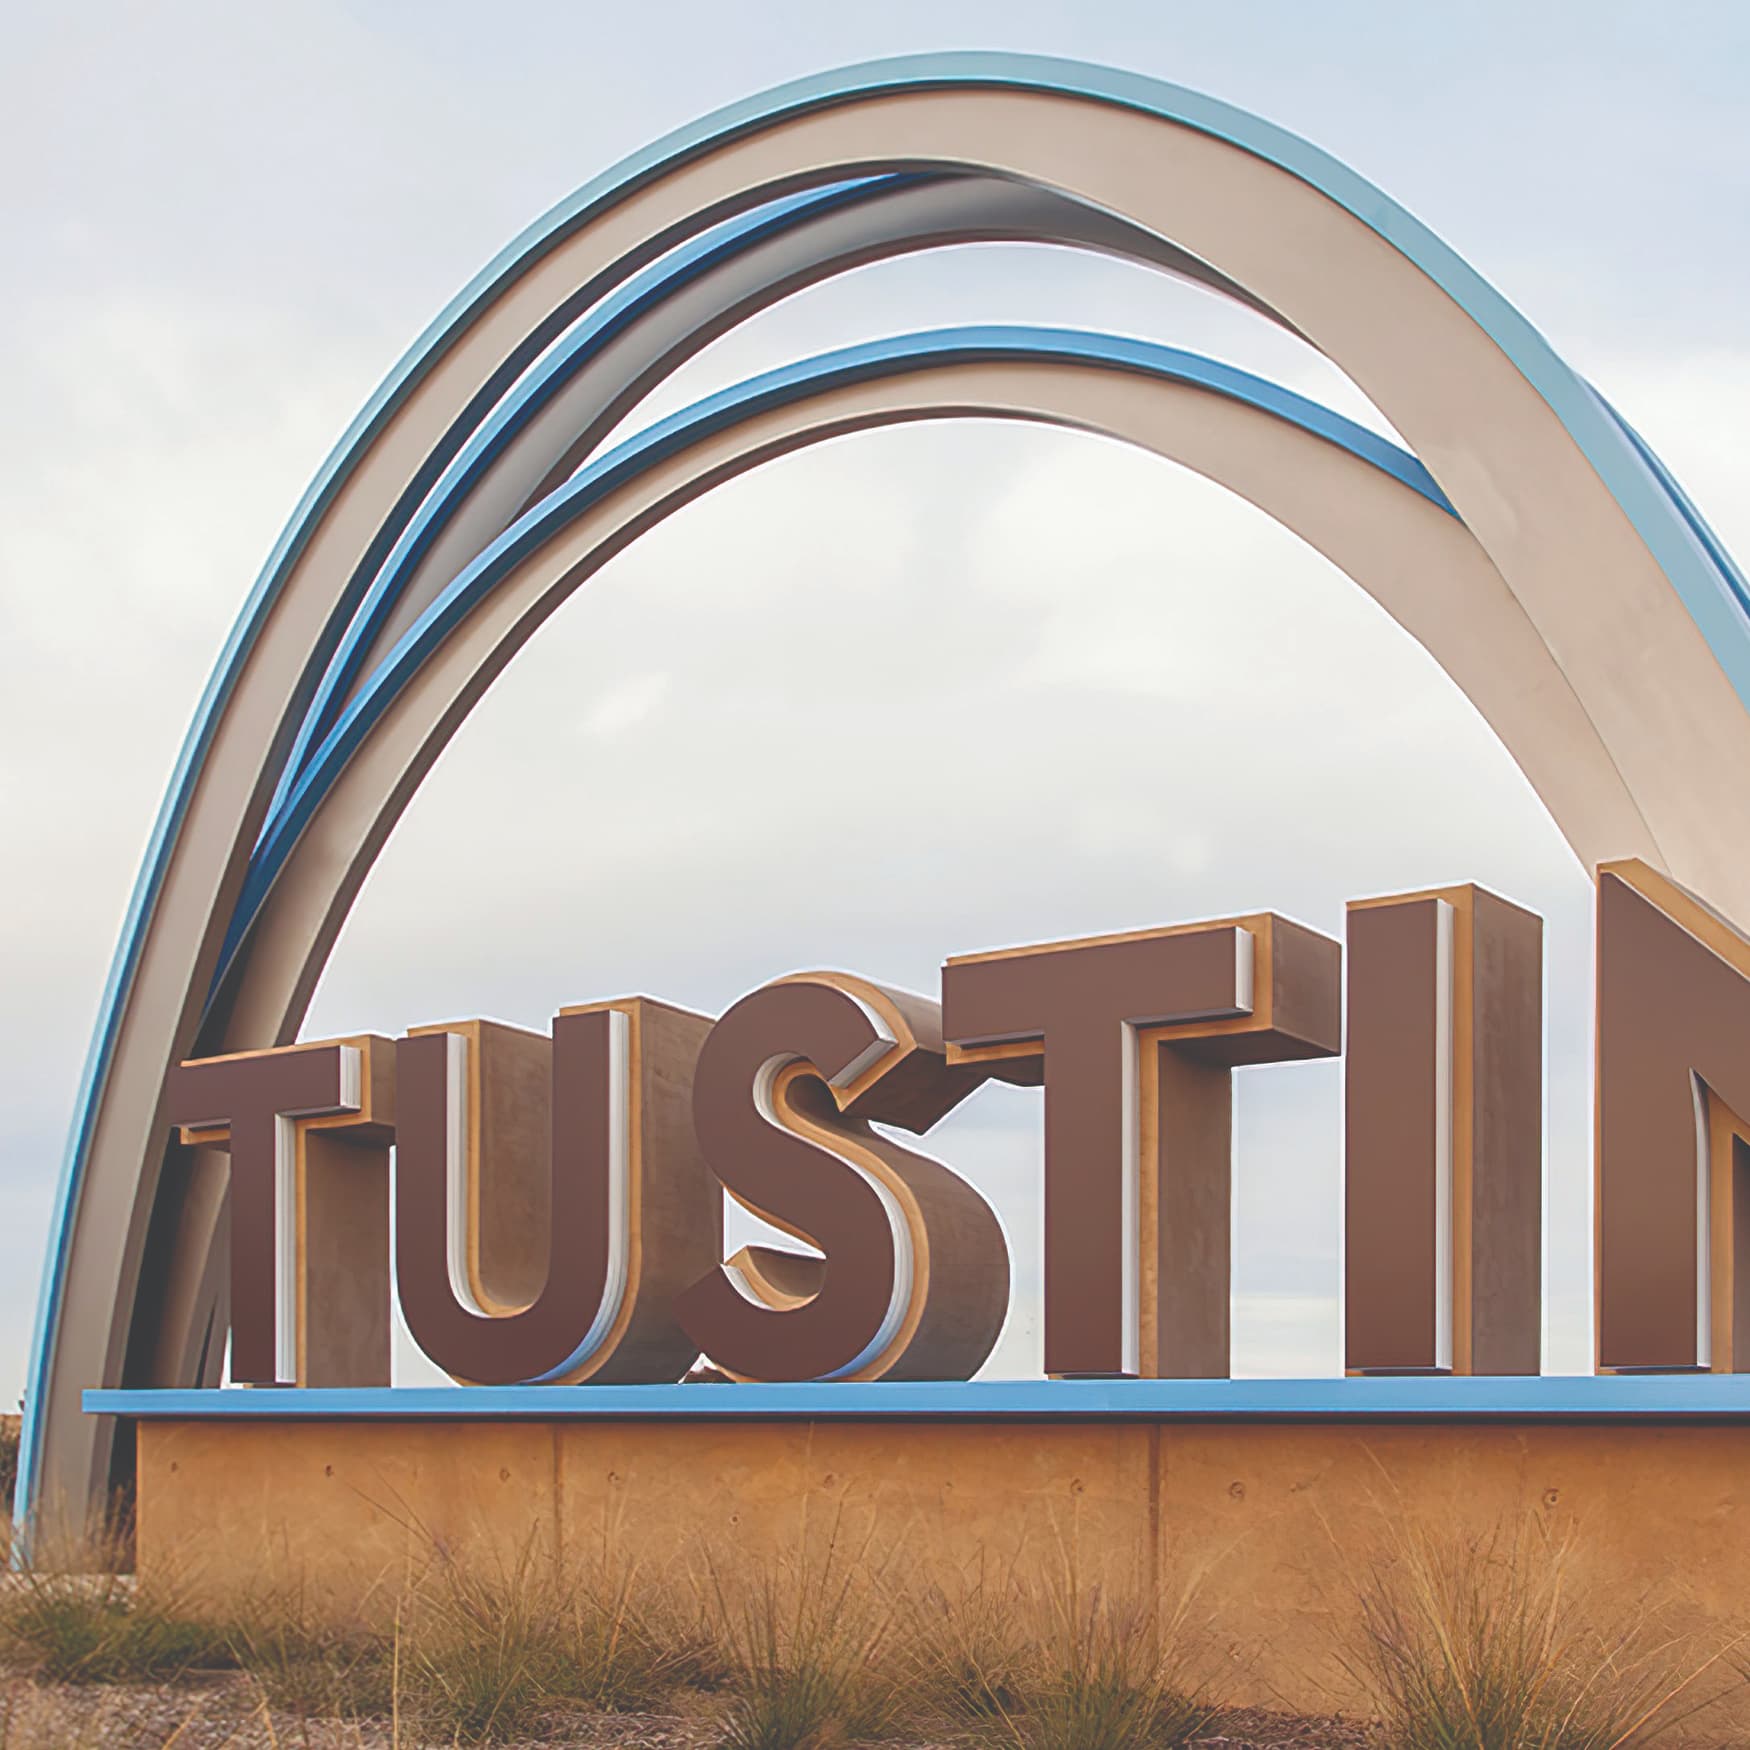 A photograph of a monument sign at Tustin Legacy featuring an arch and large fabricated letters.